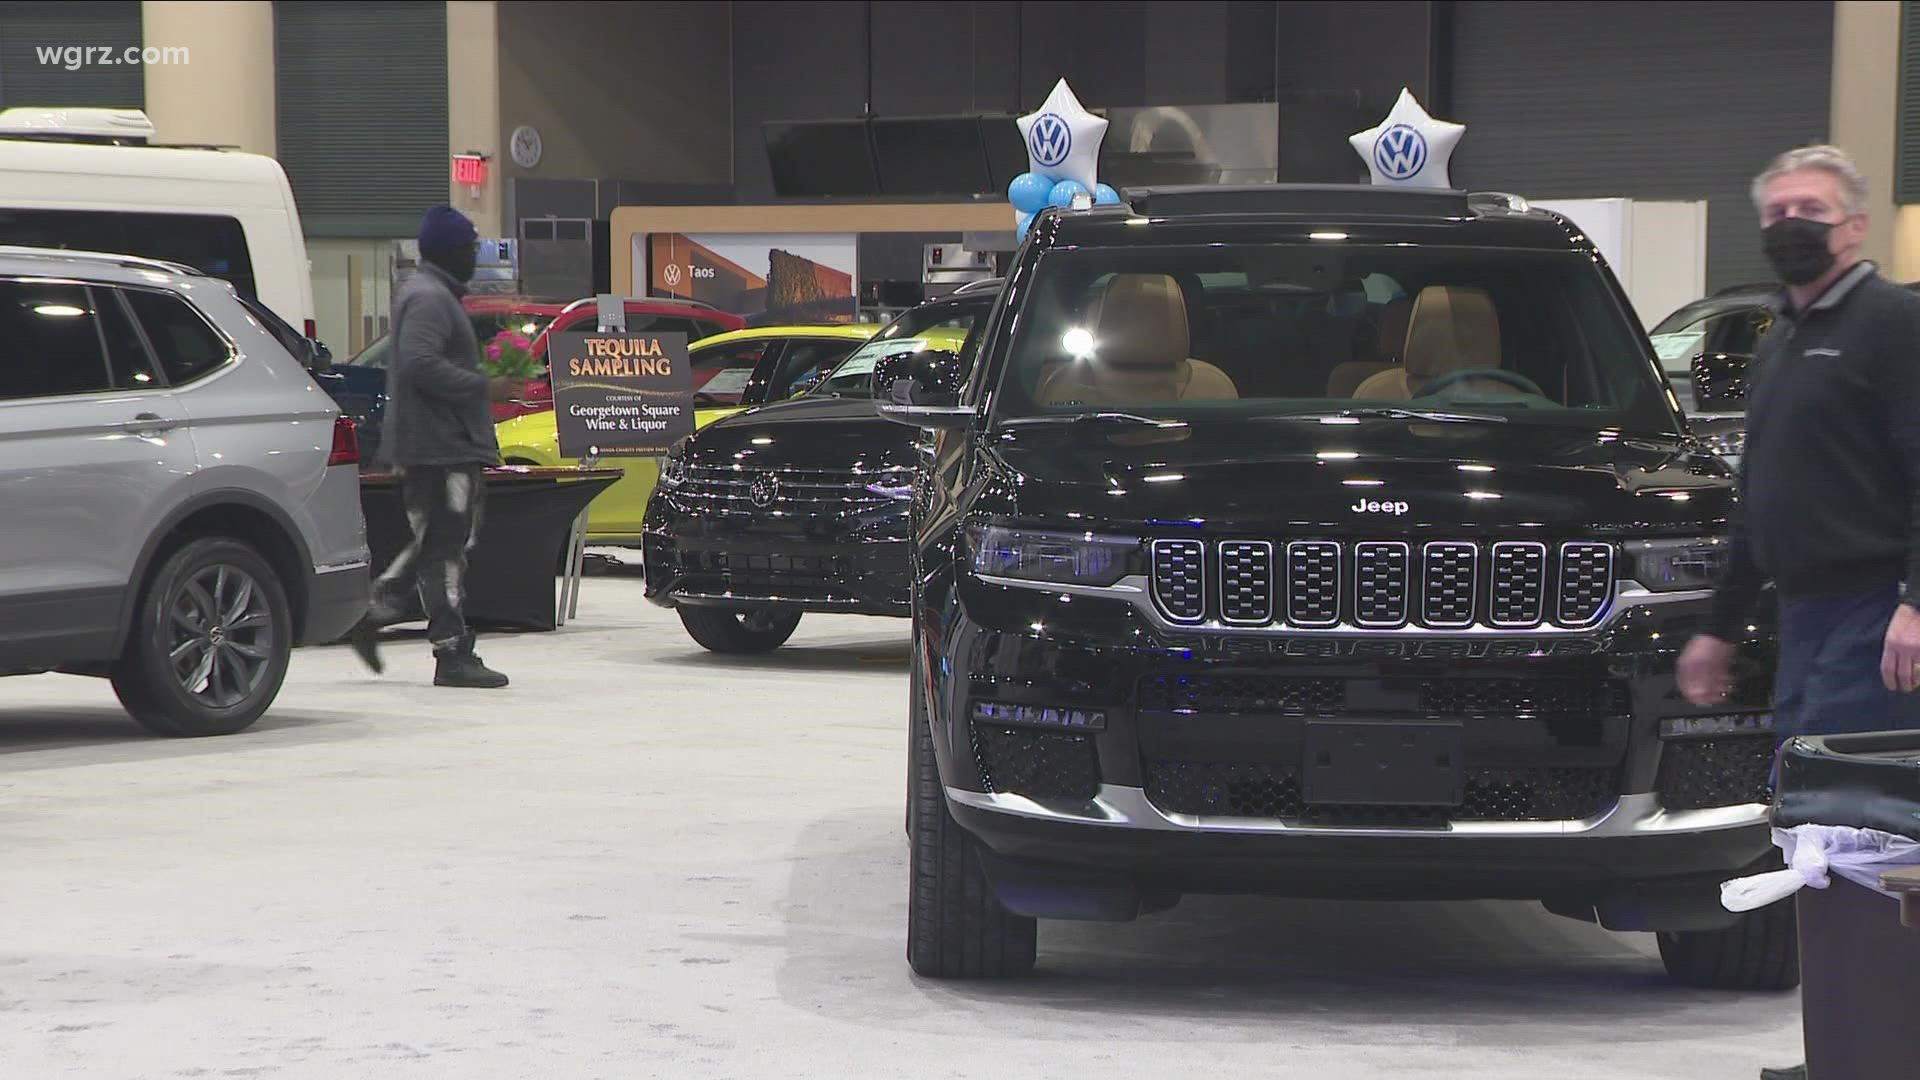 E.V.S. stealing the show at the Buffalo Auto Show